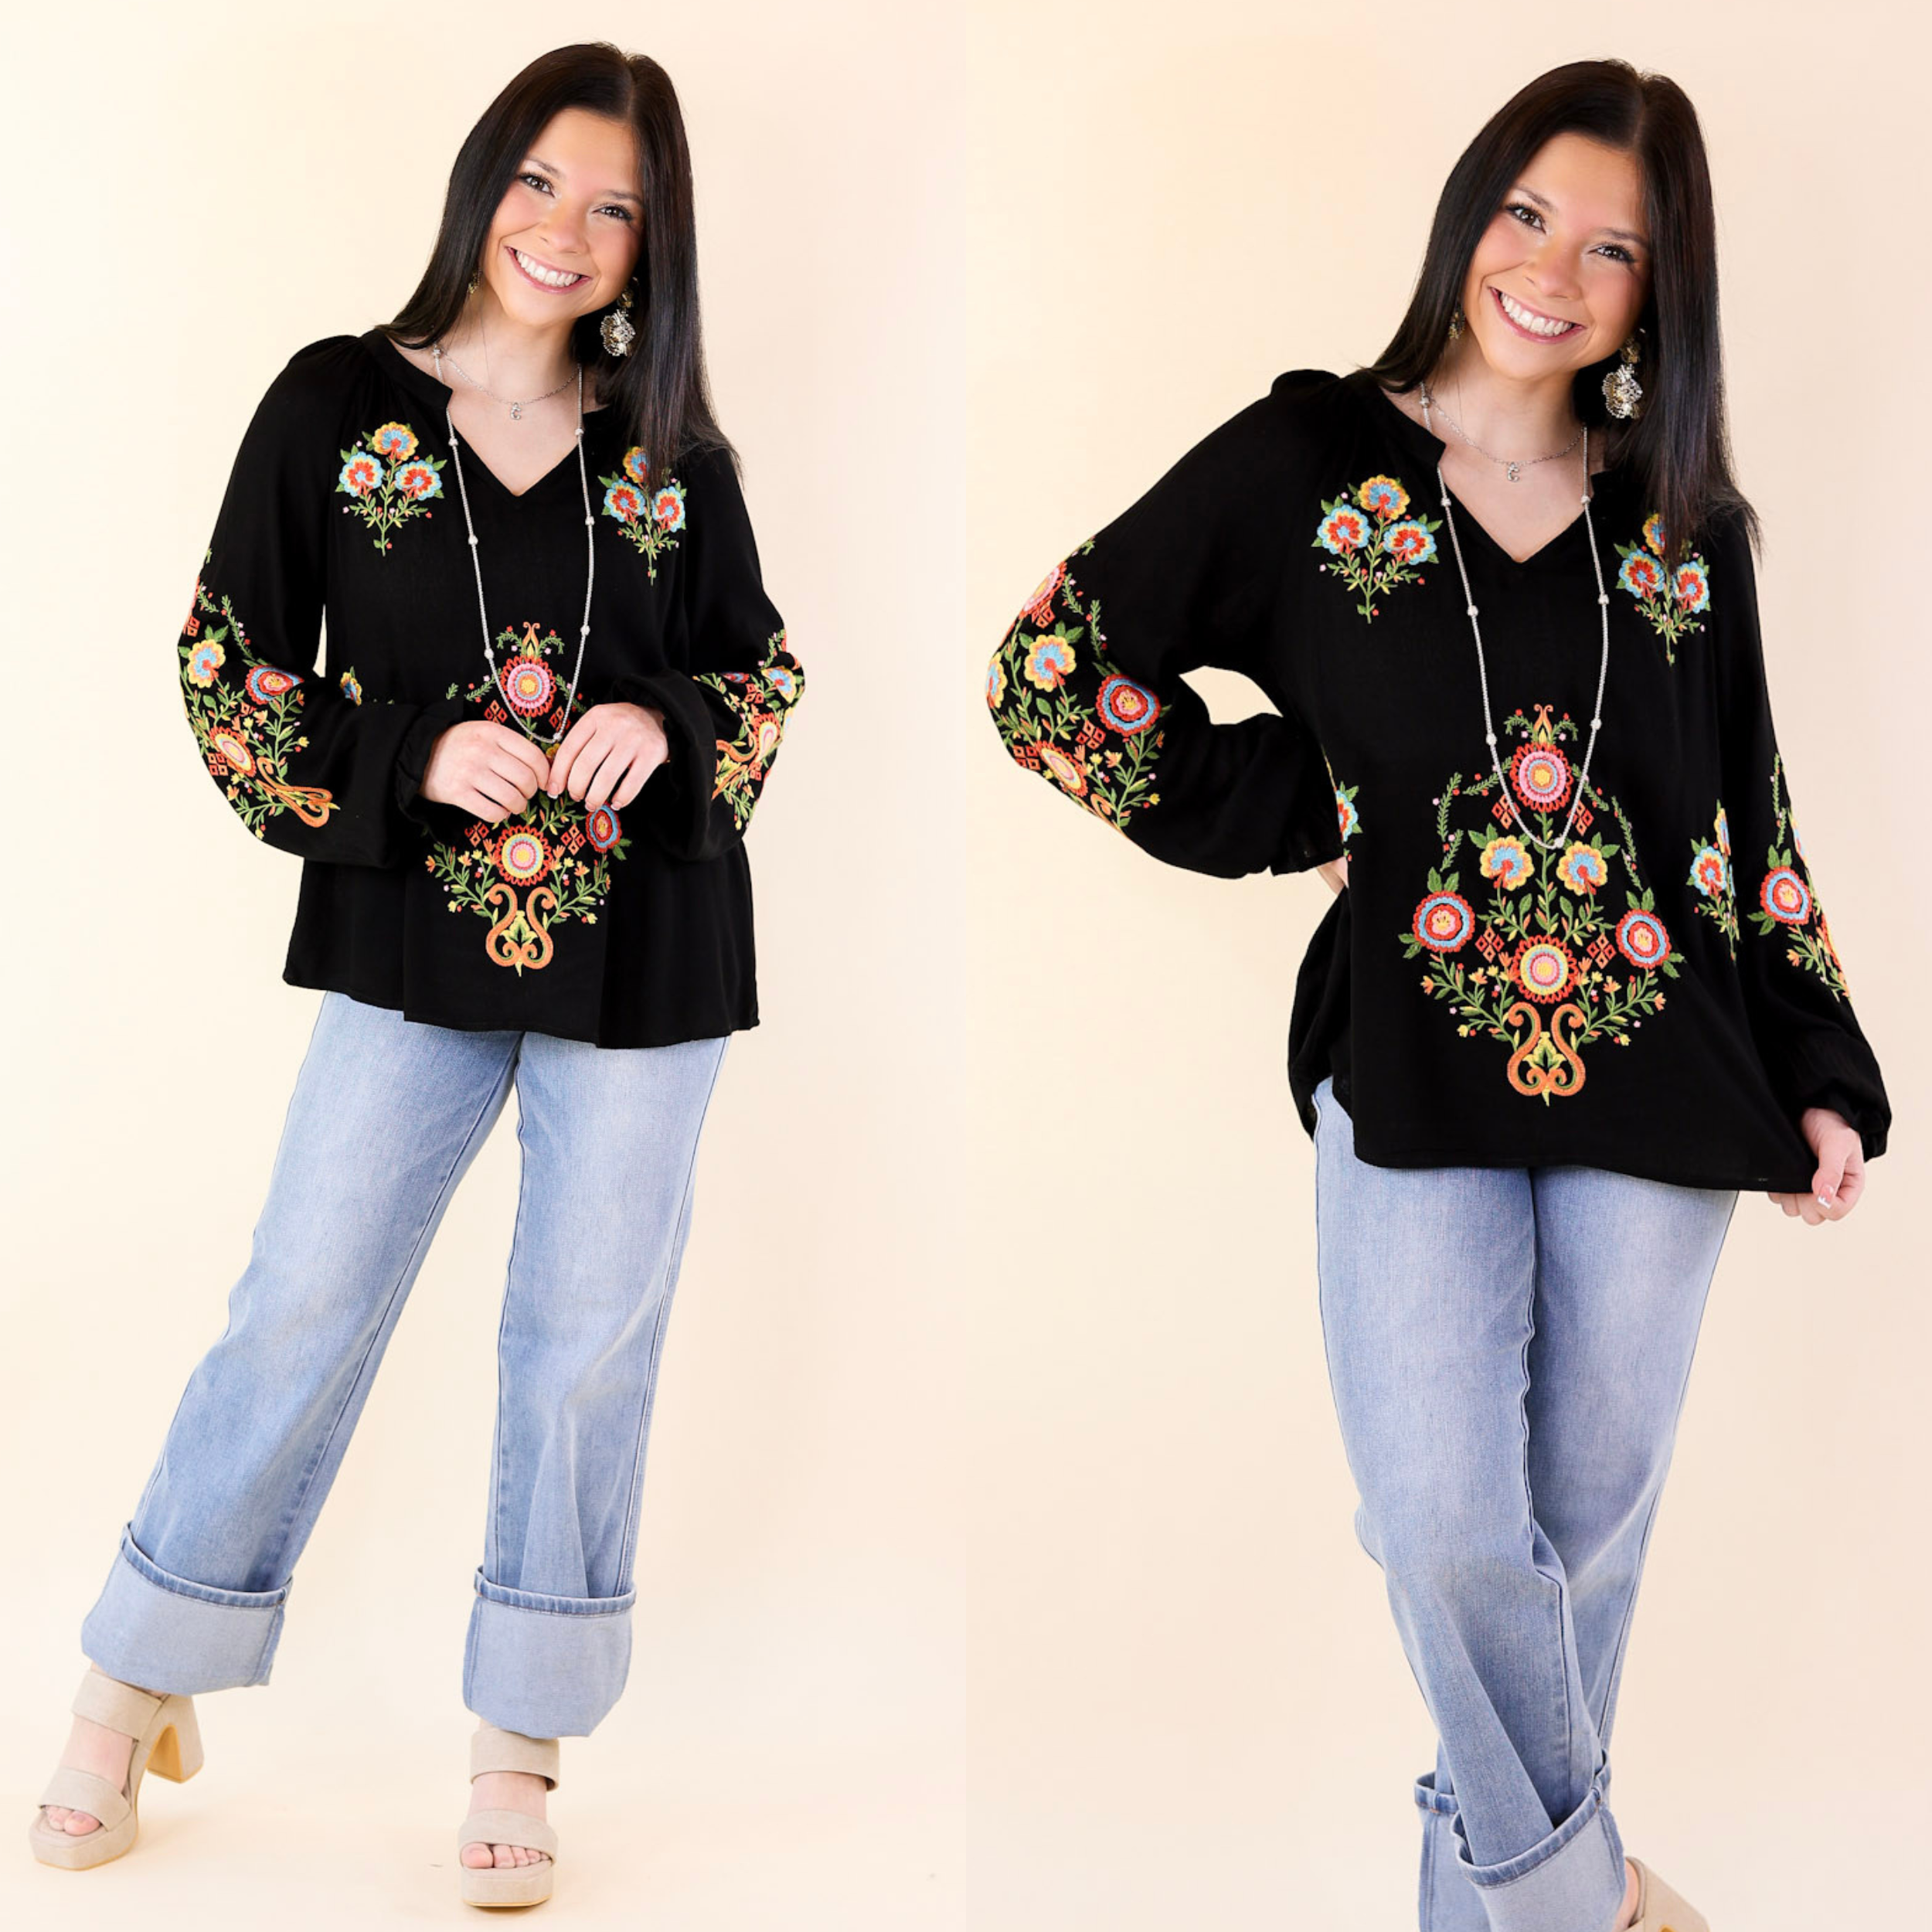 Dreamy Destination Floral Embroidered Long Sleeve Top in Black - Giddy Up Glamour Boutique